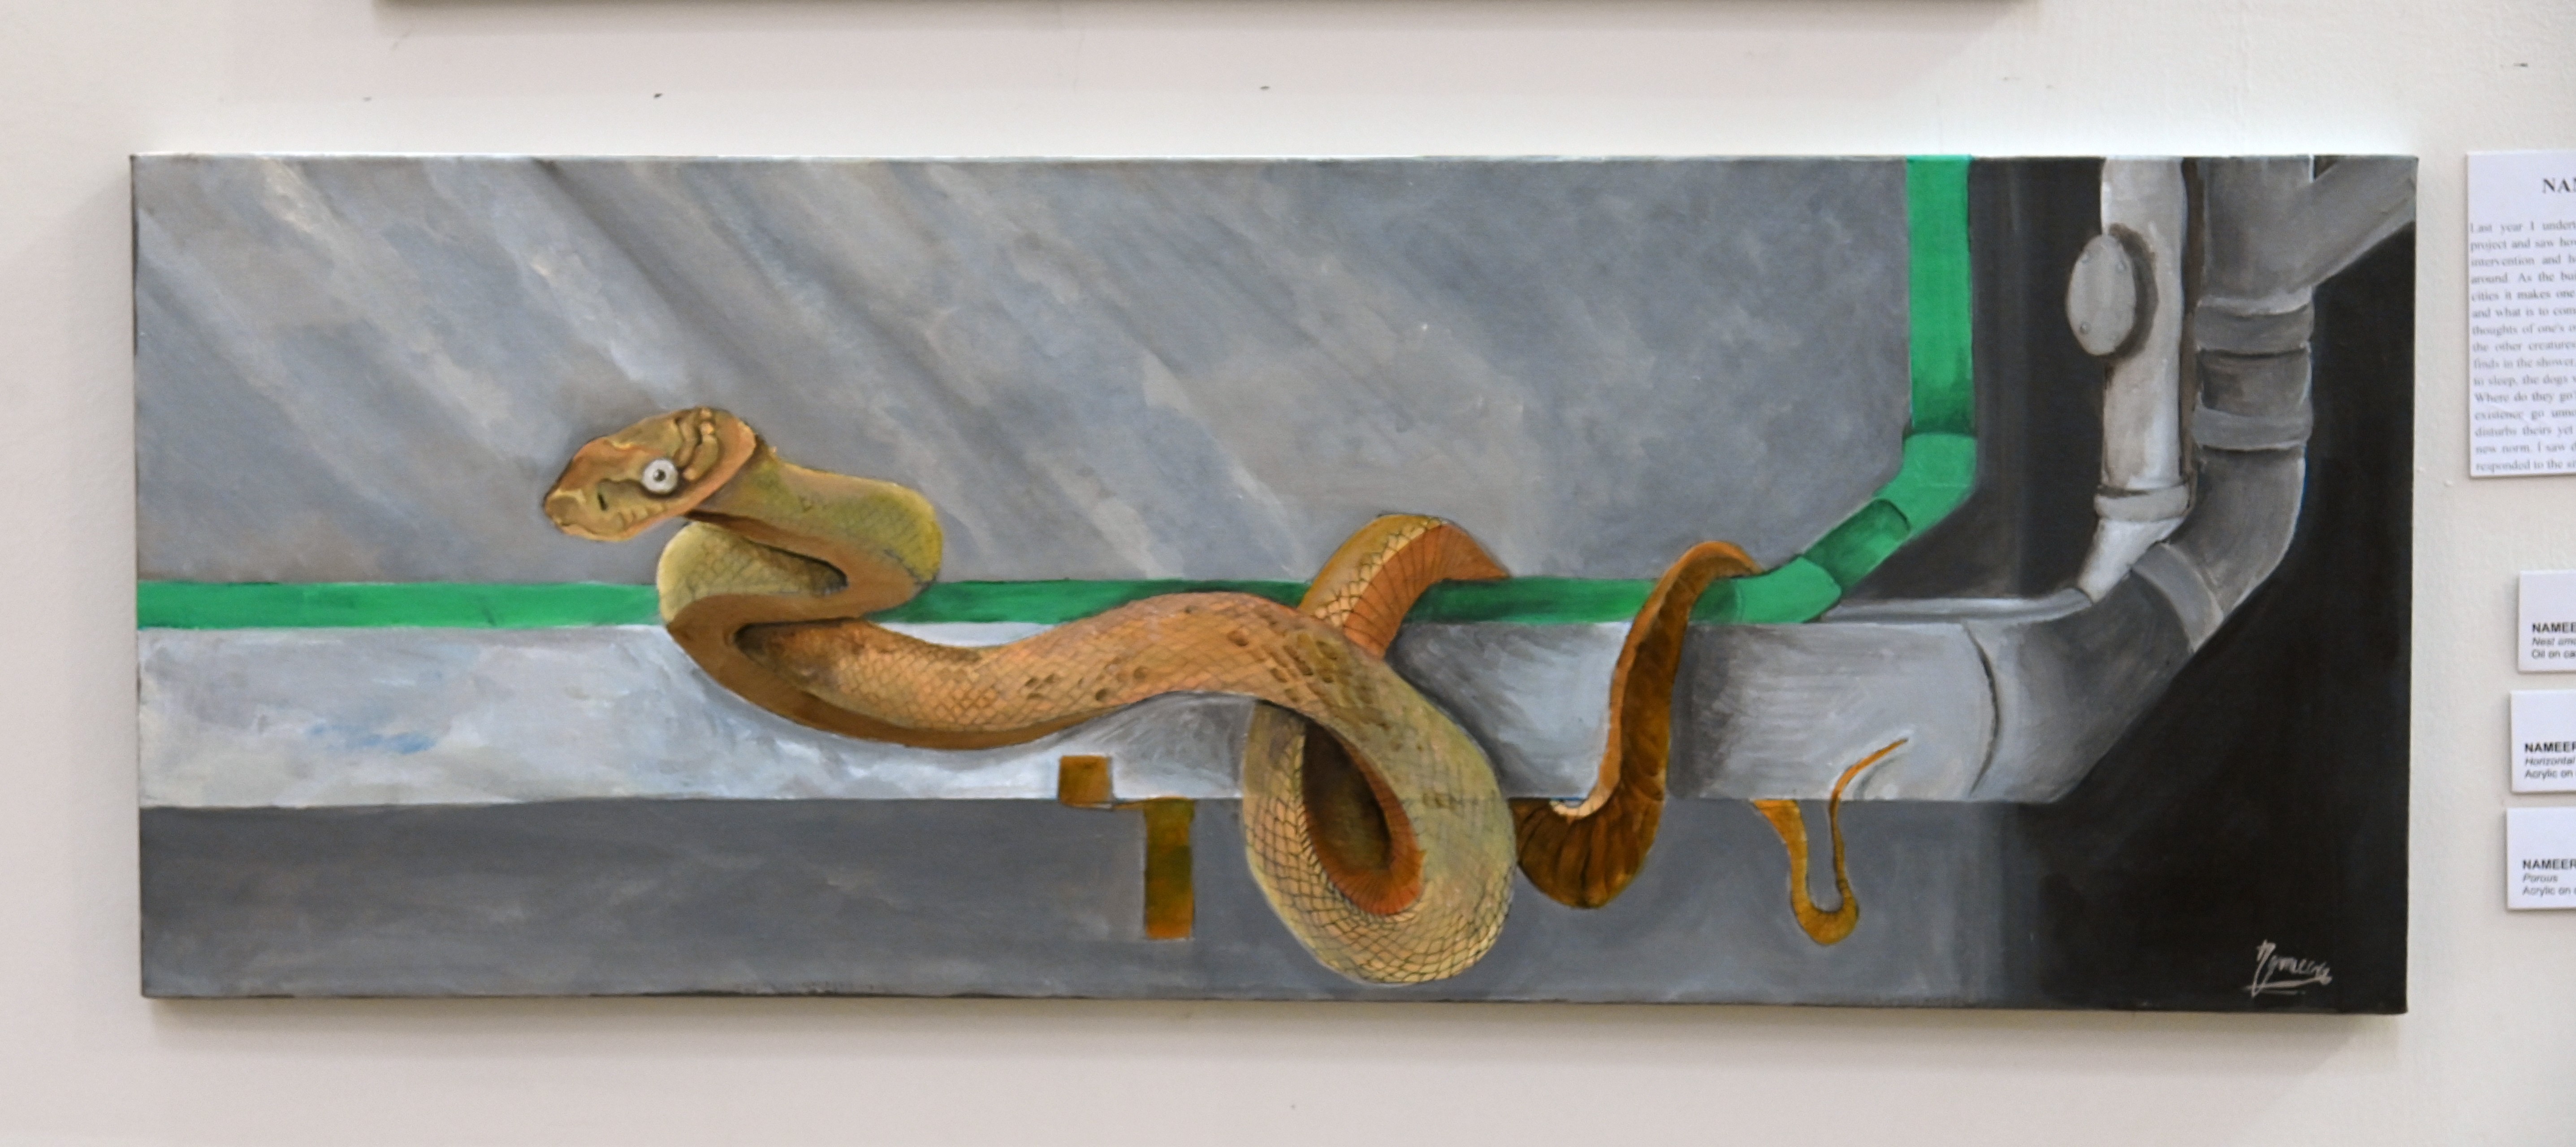 The painting of snake rolled on a pipe